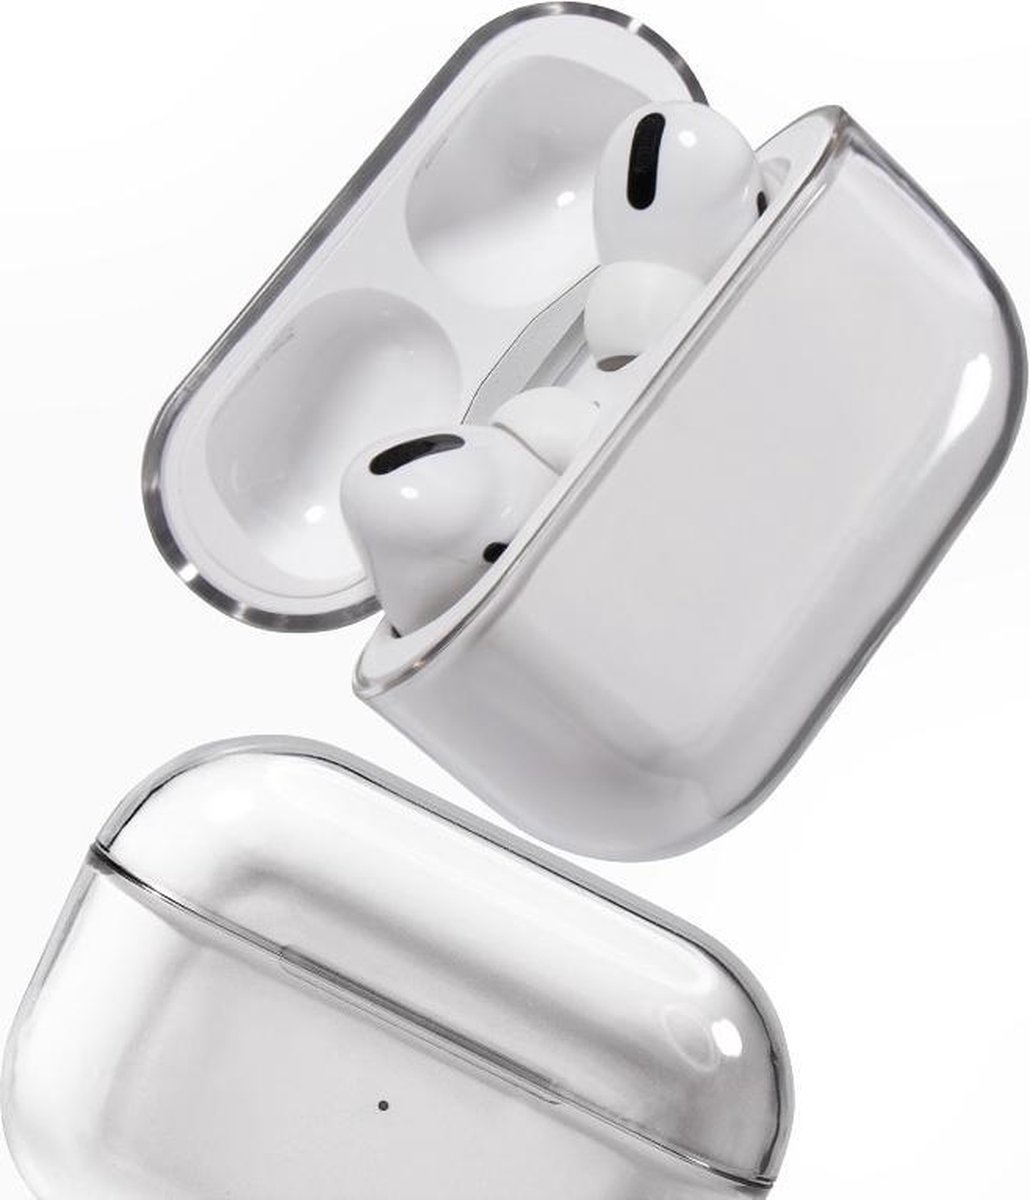 Medicca - Airpods Pro Case - Hard Case - Airpods Pro Hoesje - Airpods Pro Cover - Airpods Pro Bescherming - Transparant